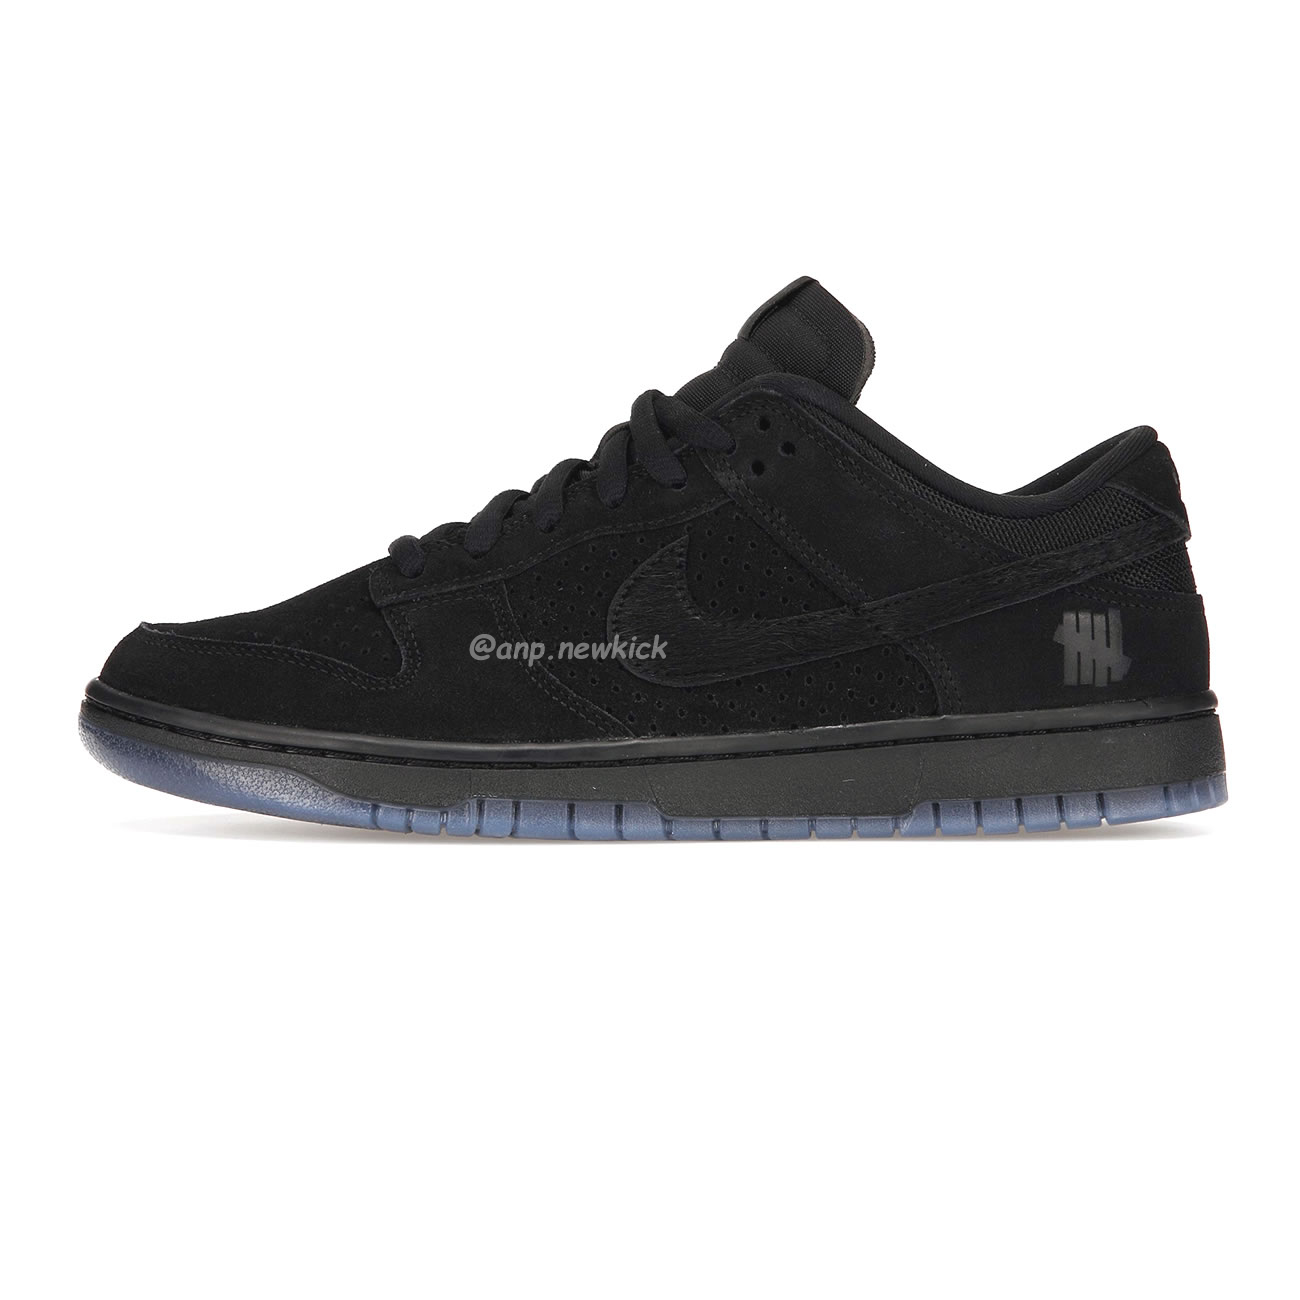 Nike Dunk Low Sp Undefeated 5 On It Black Do9329 001 (1) - newkick.org